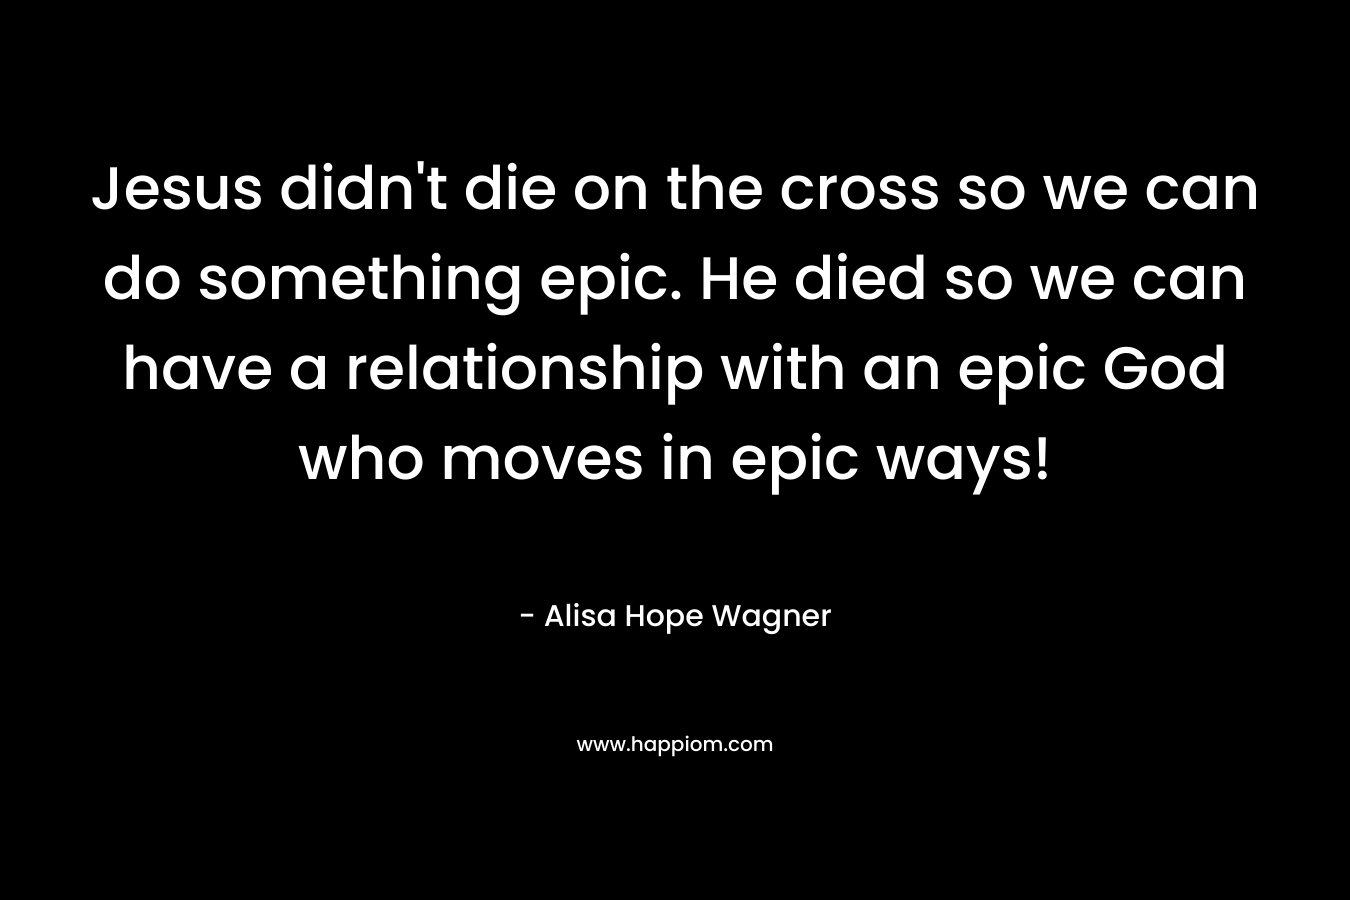 Jesus didn't die on the cross so we can do something epic. He died so we can have a relationship with an epic God who moves in epic ways!